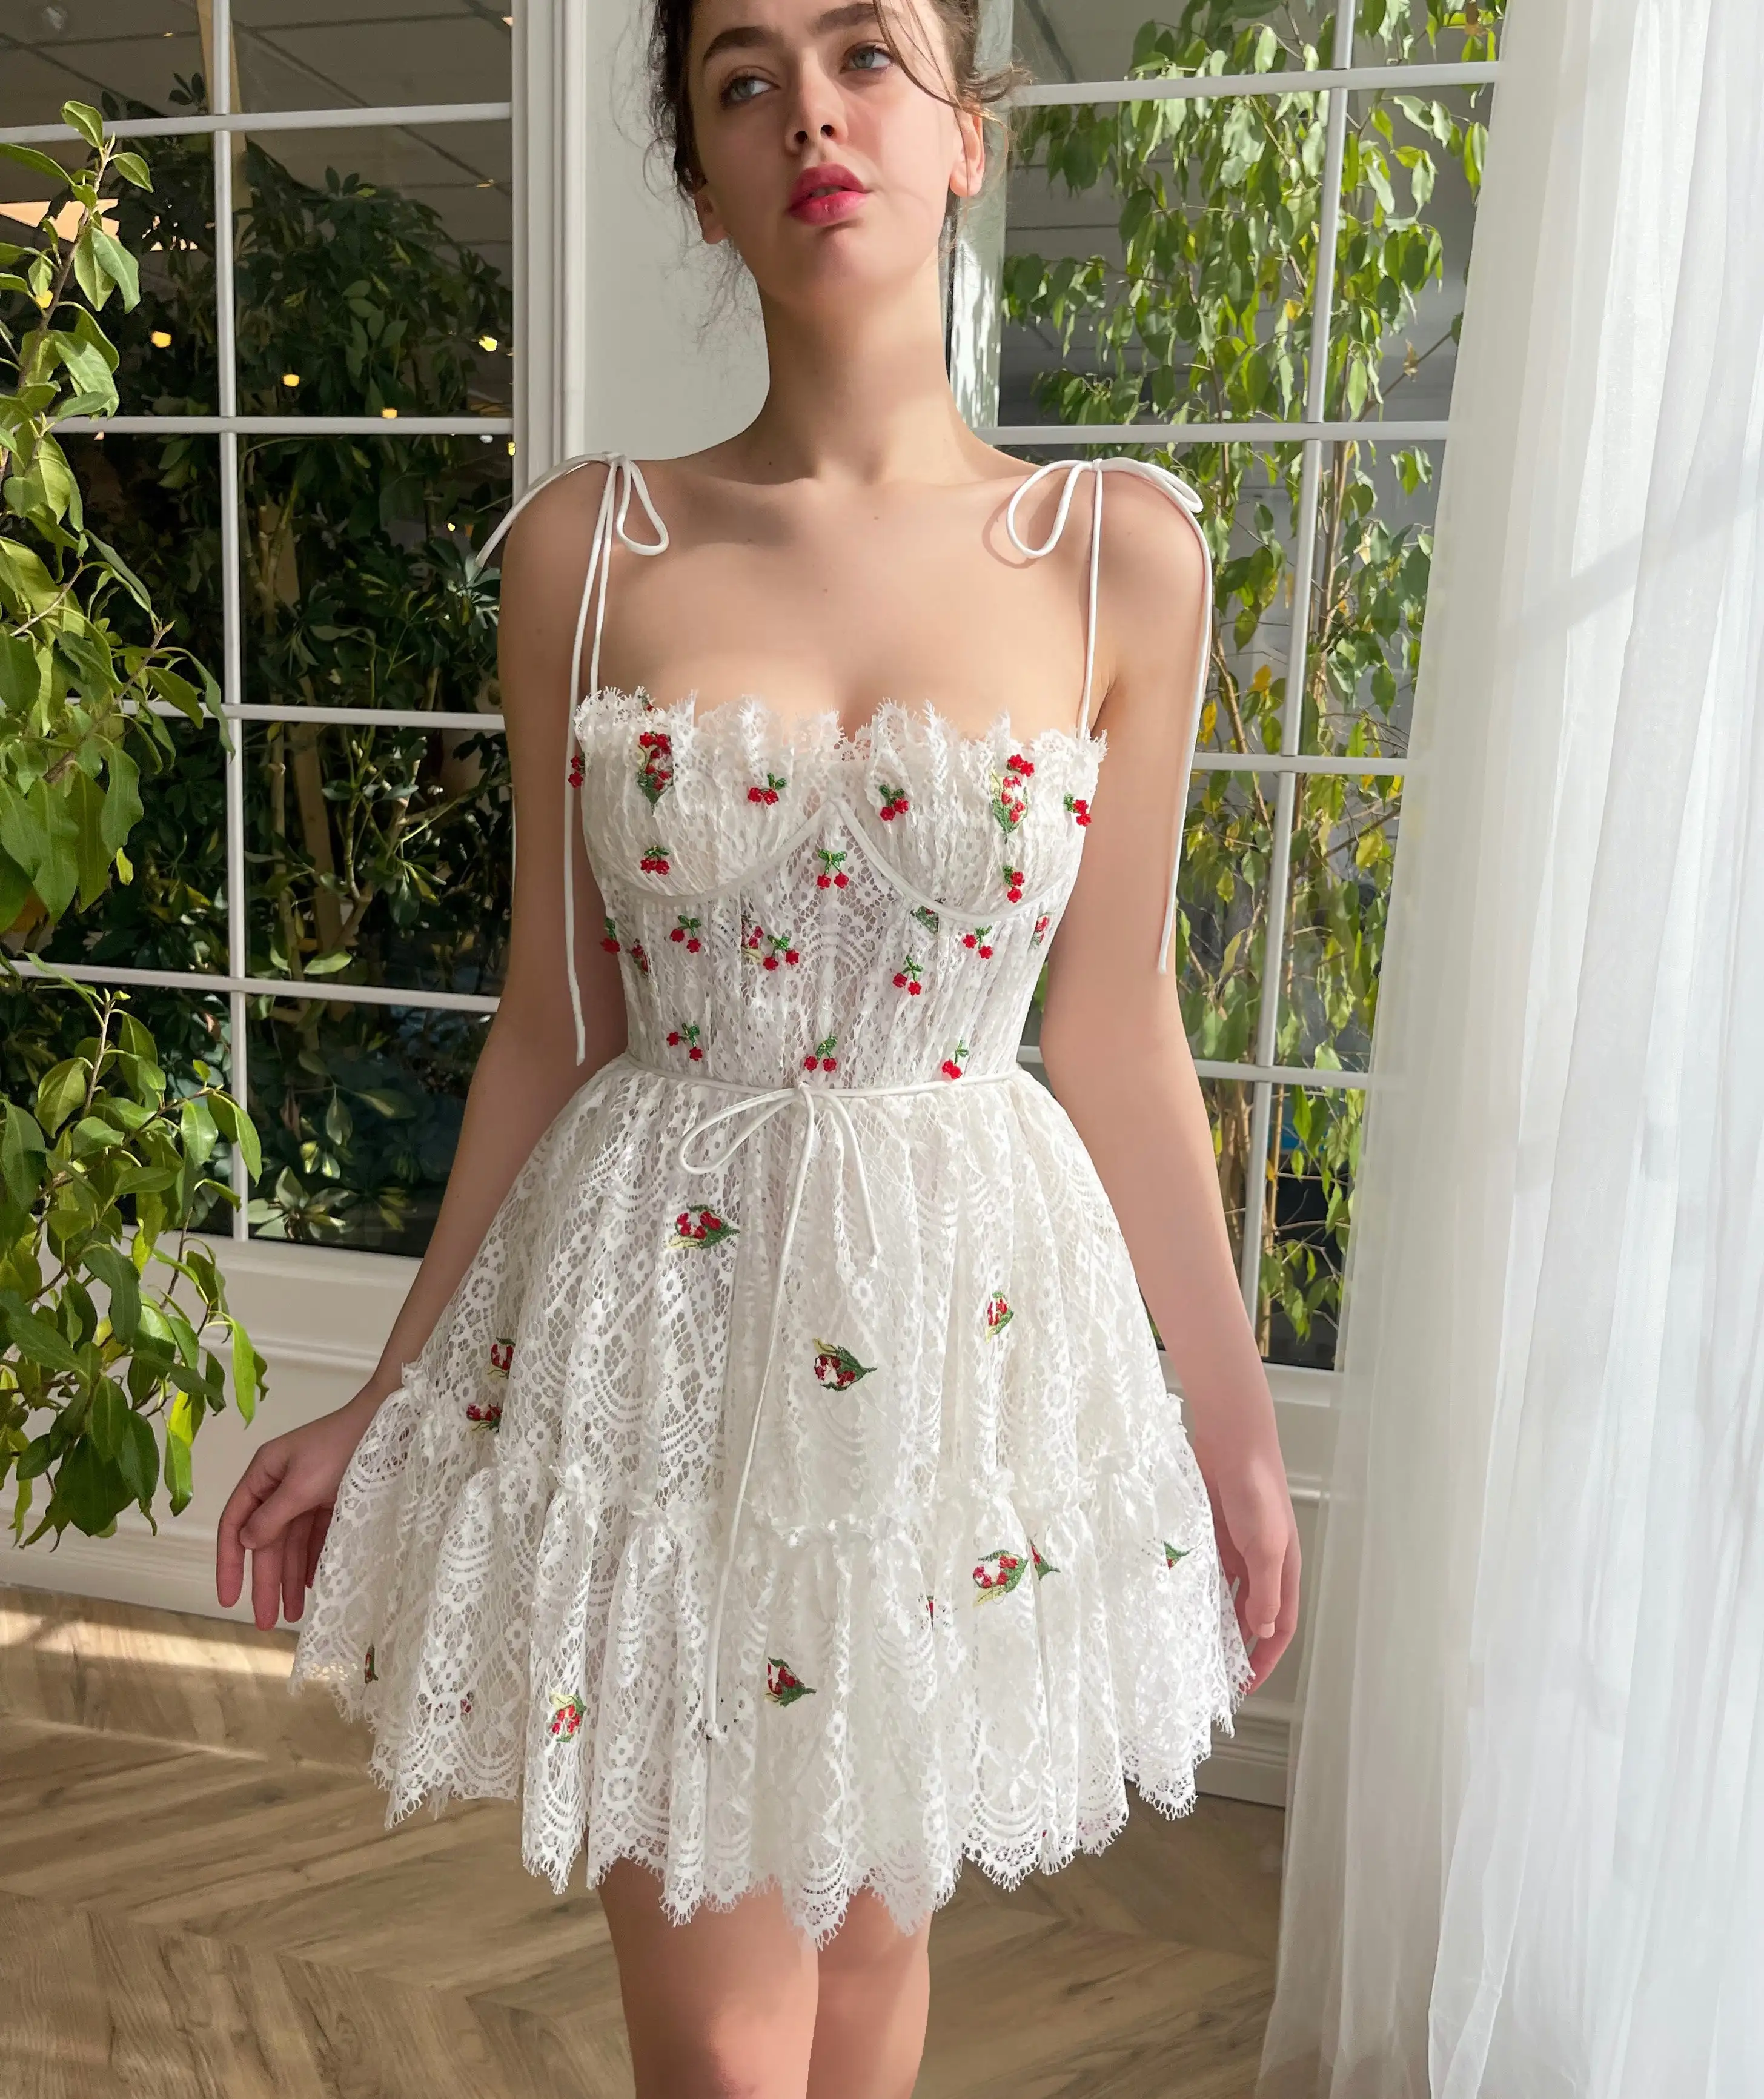 

Spaghetti Straps Cherry Lace Mini Prom Dress For Women Sweetheart A Line Party Gowns Backless Lace Up Short Homecoming Dresses